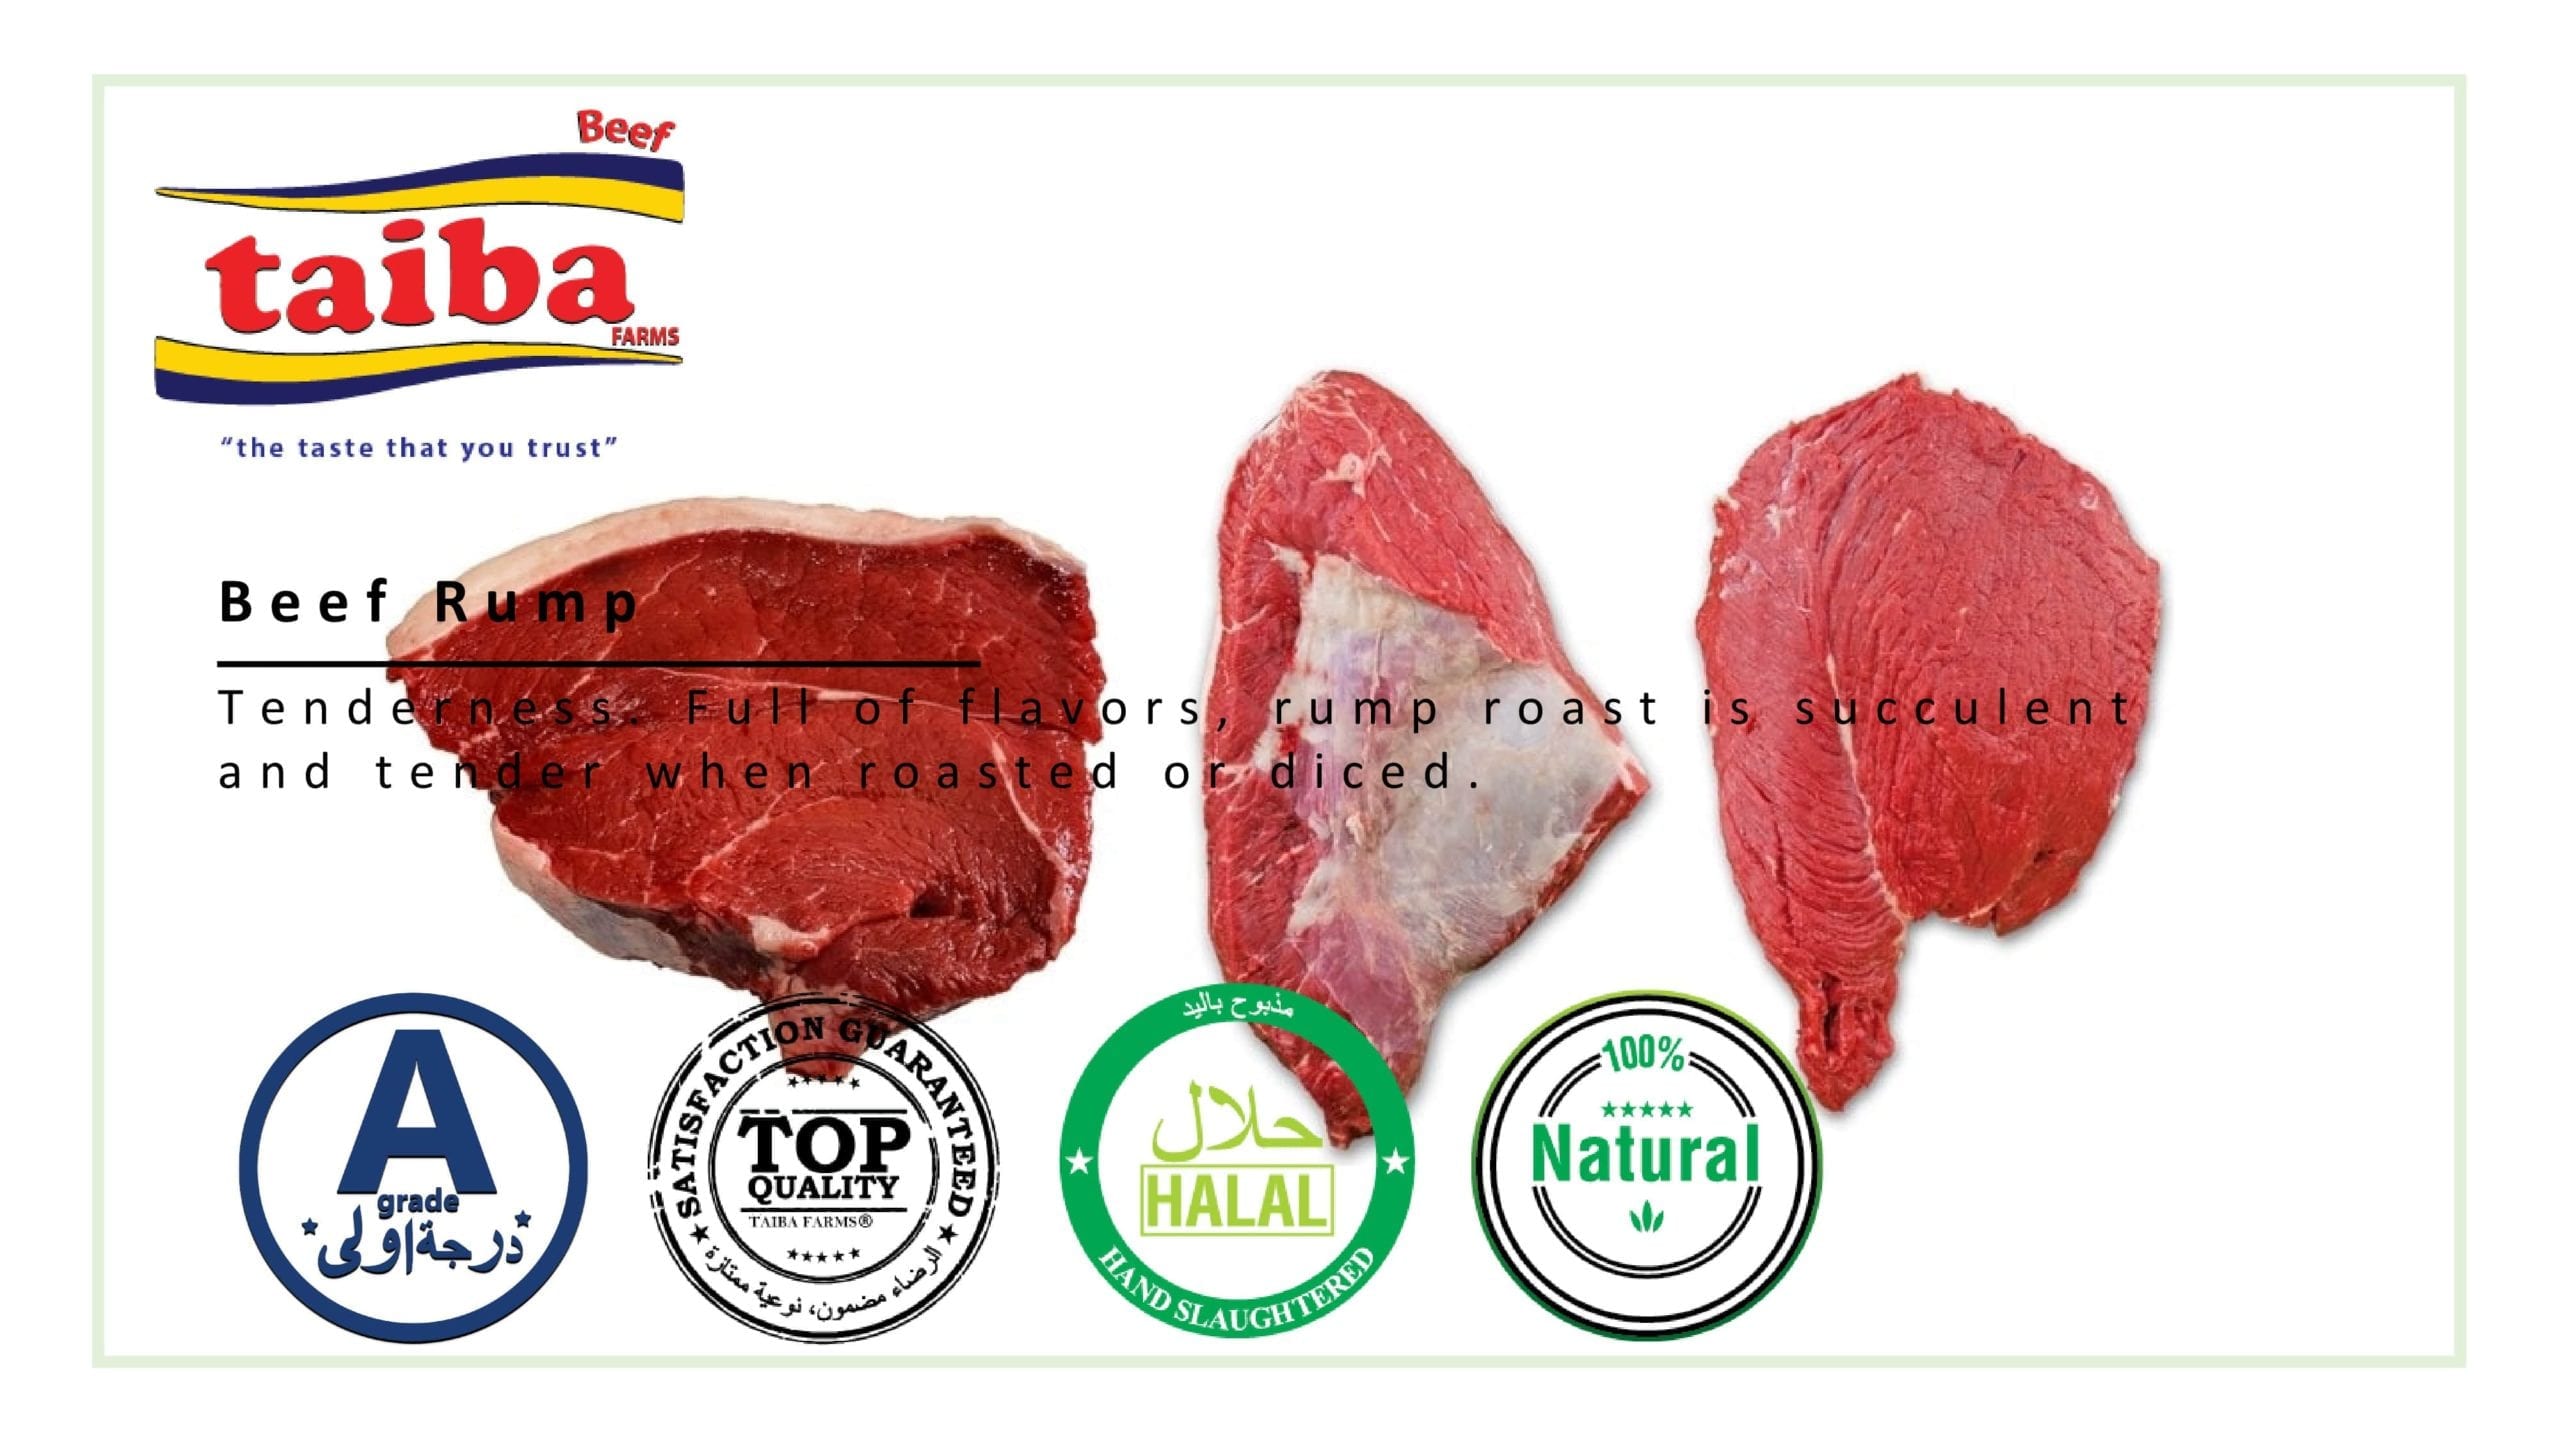 Beef RUMP: wholesalers, suppliers, and Halal meat producers